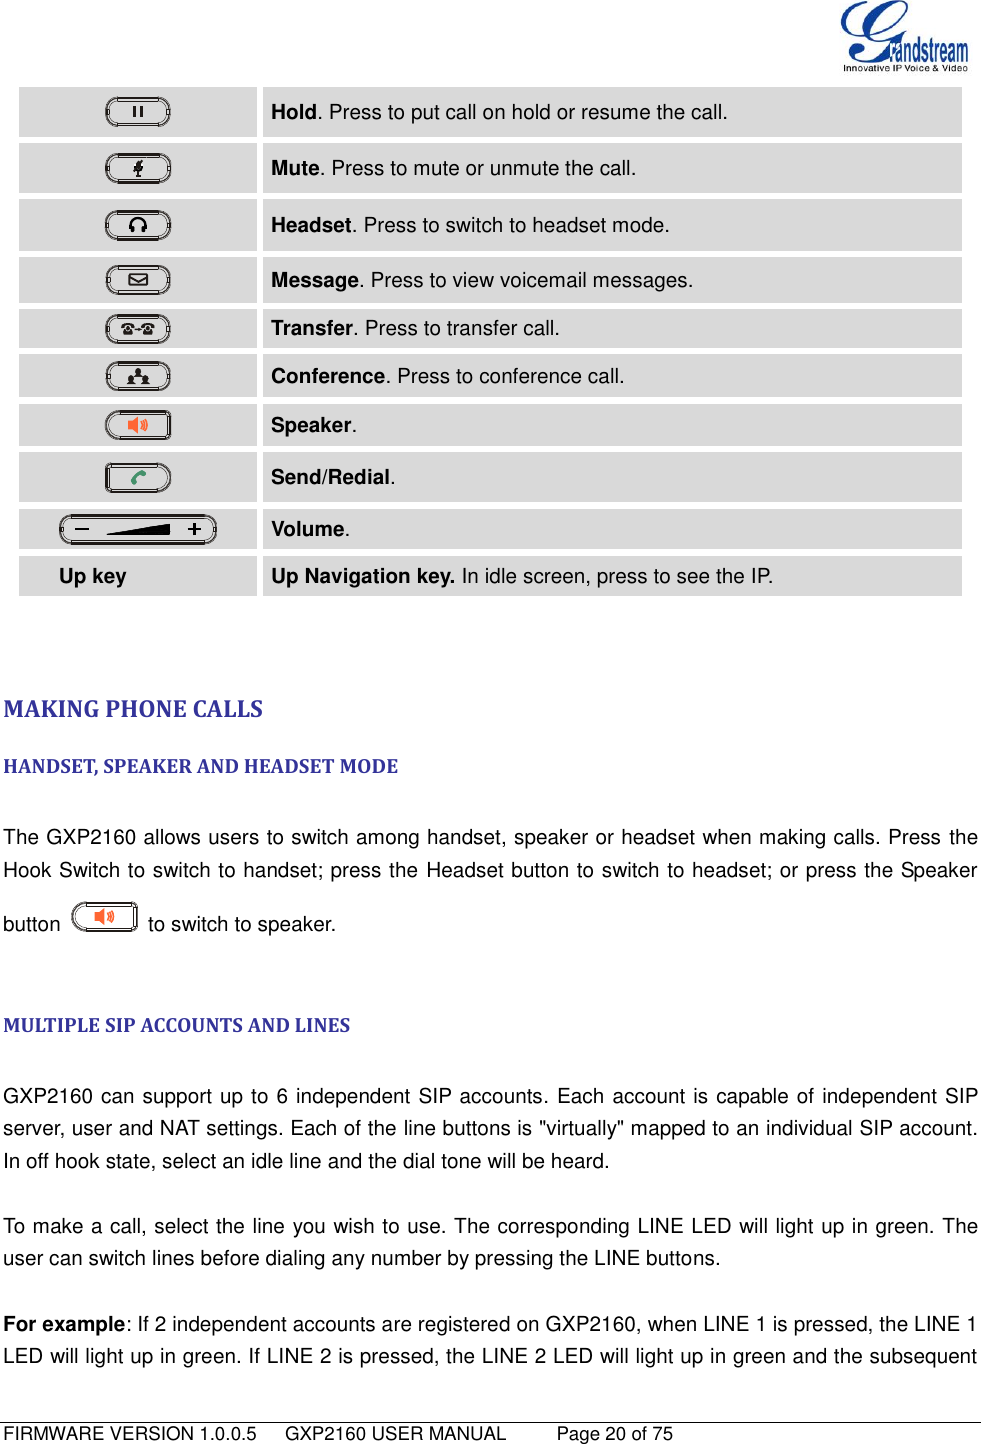   FIRMWARE VERSION 1.0.0.5   GXP2160 USER MANUAL     Page 20 of 75                                    Hold. Press to put call on hold or resume the call.  Mute. Press to mute or unmute the call.  Headset. Press to switch to headset mode.  Message. Press to view voicemail messages.  Transfer. Press to transfer call.  Conference. Press to conference call.  Speaker.  Send/Redial.  Volume.    Up key Up Navigation key. In idle screen, press to see the IP.     MAKING PHONE CALLS HANDSET, SPEAKER AND HEADSET MODE  The GXP2160 allows users to switch among handset, speaker or headset when making calls. Press the Hook Switch to switch to handset; press the Headset button to switch to headset; or press the Speaker button    to switch to speaker.  MULTIPLE SIP ACCOUNTS AND LINES  GXP2160 can support up to 6 independent SIP accounts. Each account is capable of independent SIP server, user and NAT settings. Each of the line buttons is &quot;virtually&quot; mapped to an individual SIP account. In off hook state, select an idle line and the dial tone will be heard.   To make a call, select the line you wish to use. The corresponding LINE LED will light up in green. The user can switch lines before dialing any number by pressing the LINE buttons.  For example: If 2 independent accounts are registered on GXP2160, when LINE 1 is pressed, the LINE 1 LED will light up in green. If LINE 2 is pressed, the LINE 2 LED will light up in green and the subsequent 